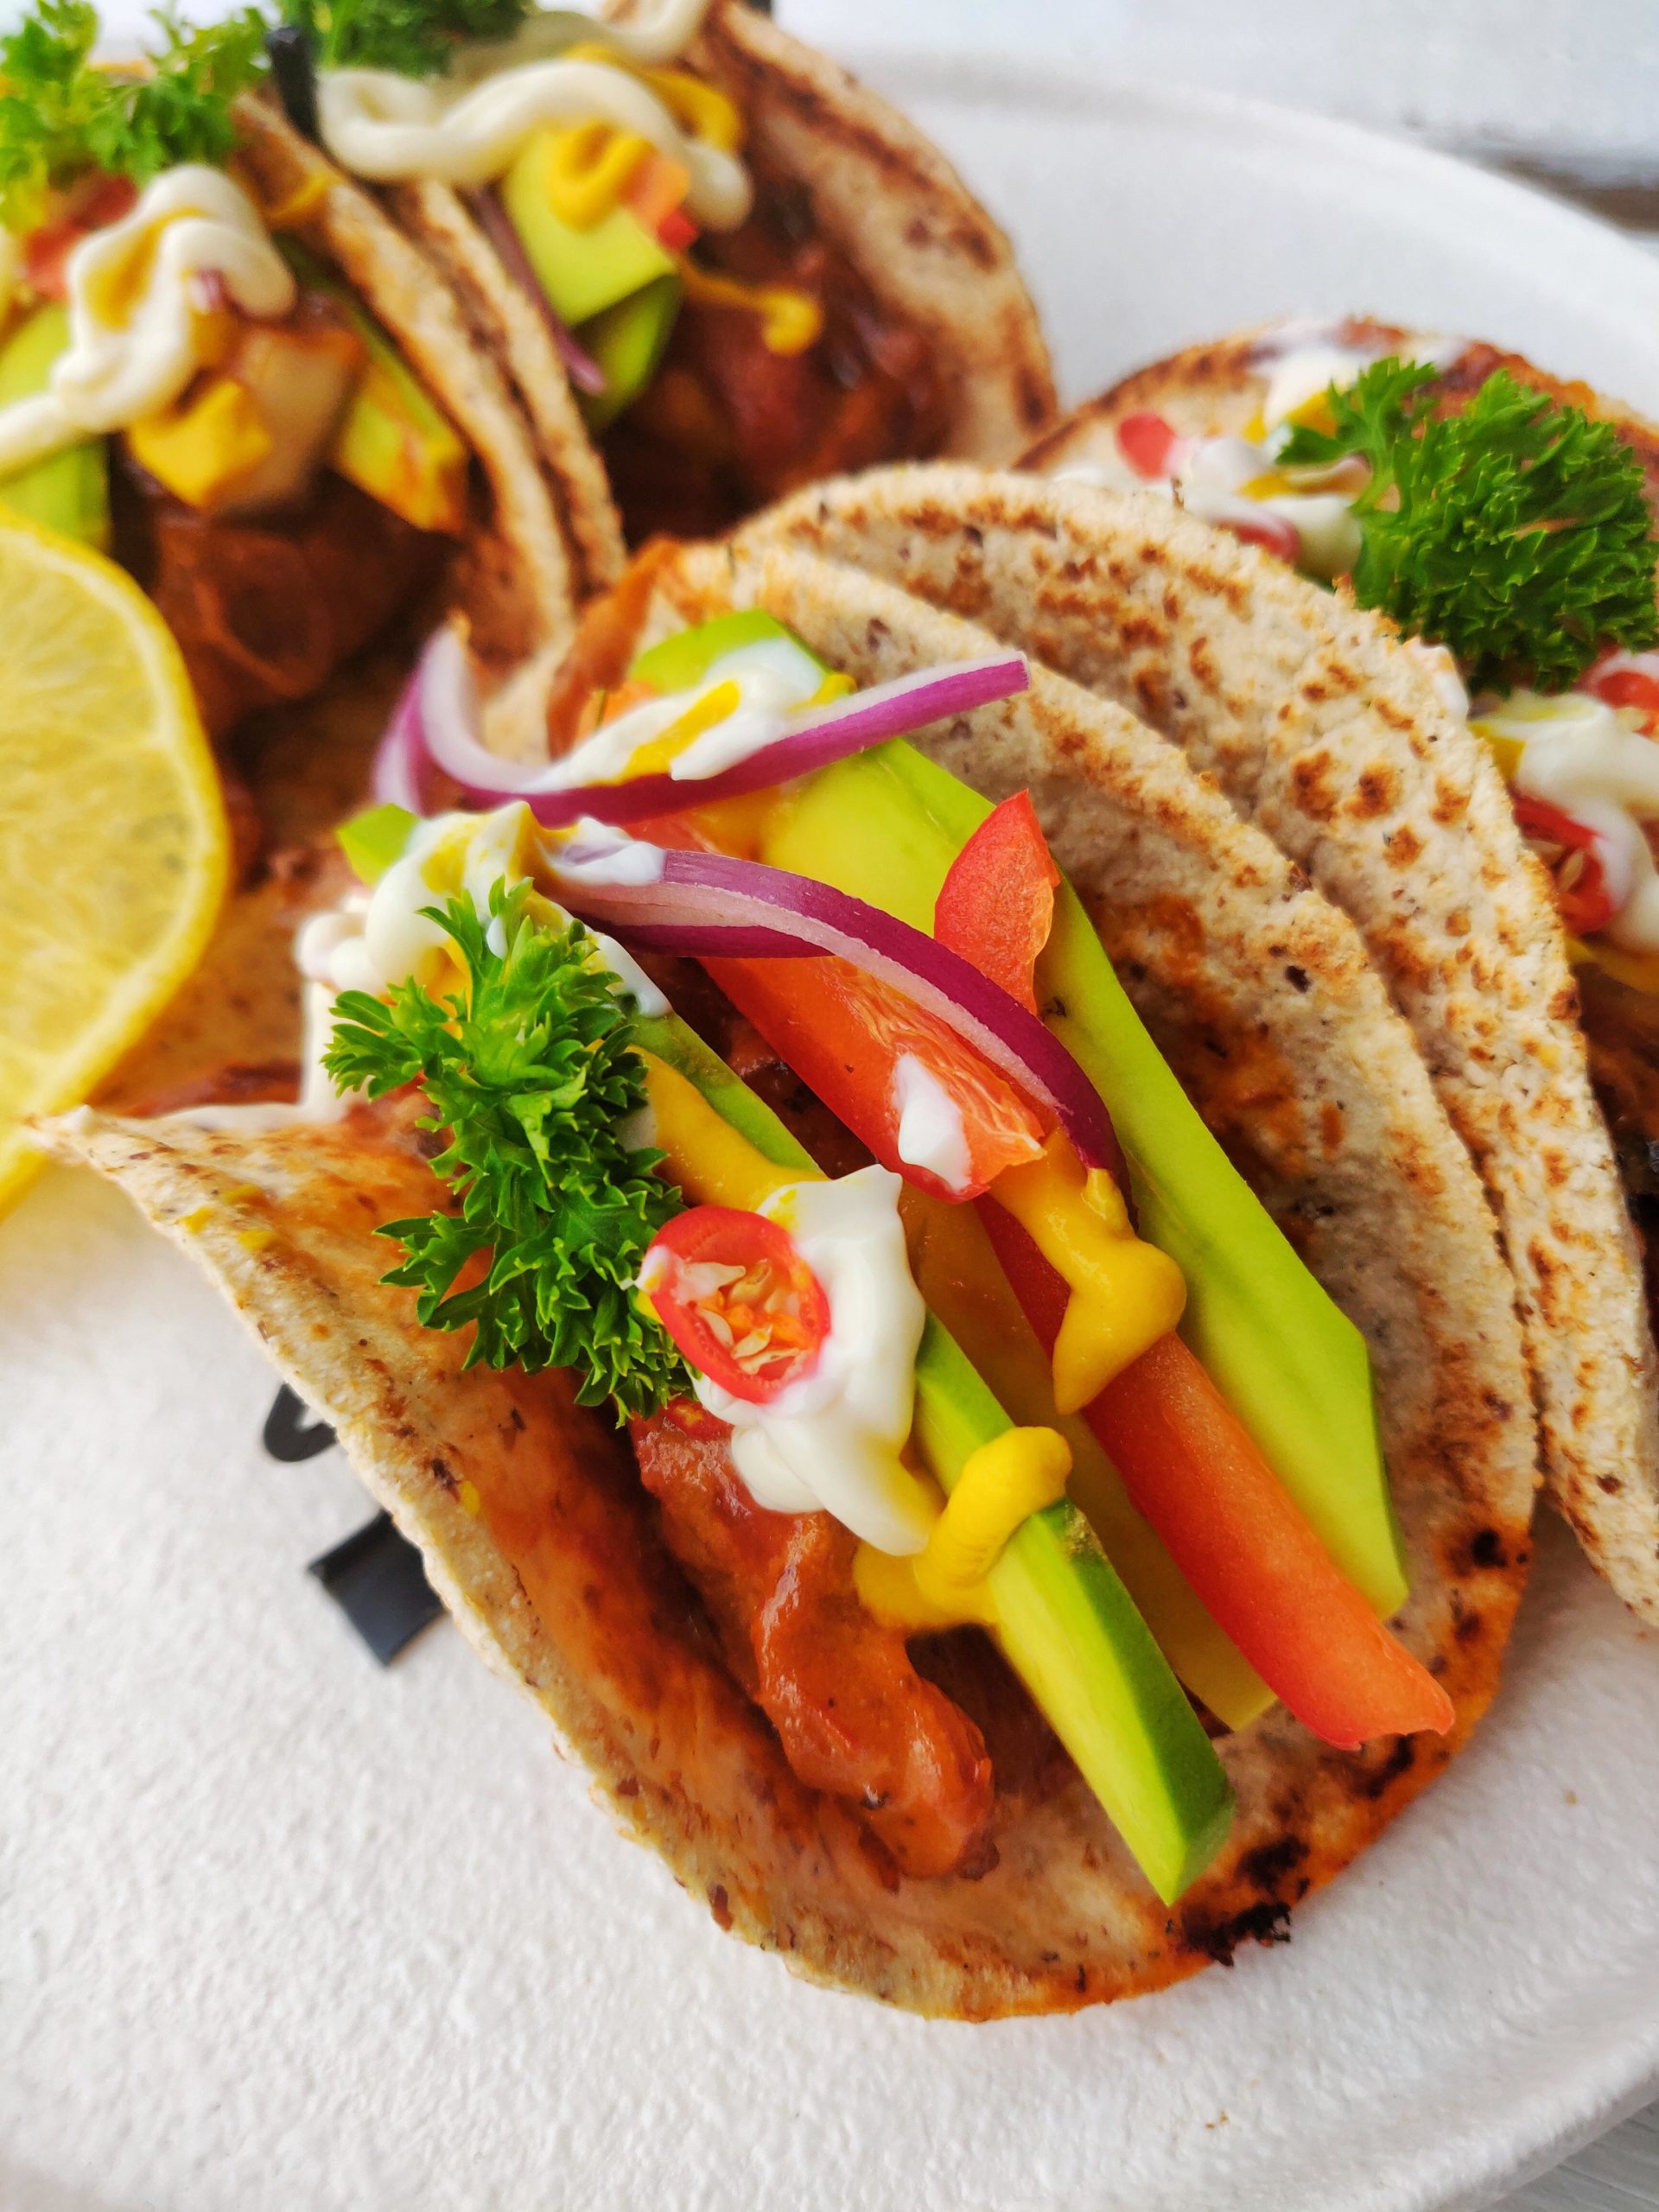 Creamy tofu gluten free tacos, the soft tacos shells are made from ...